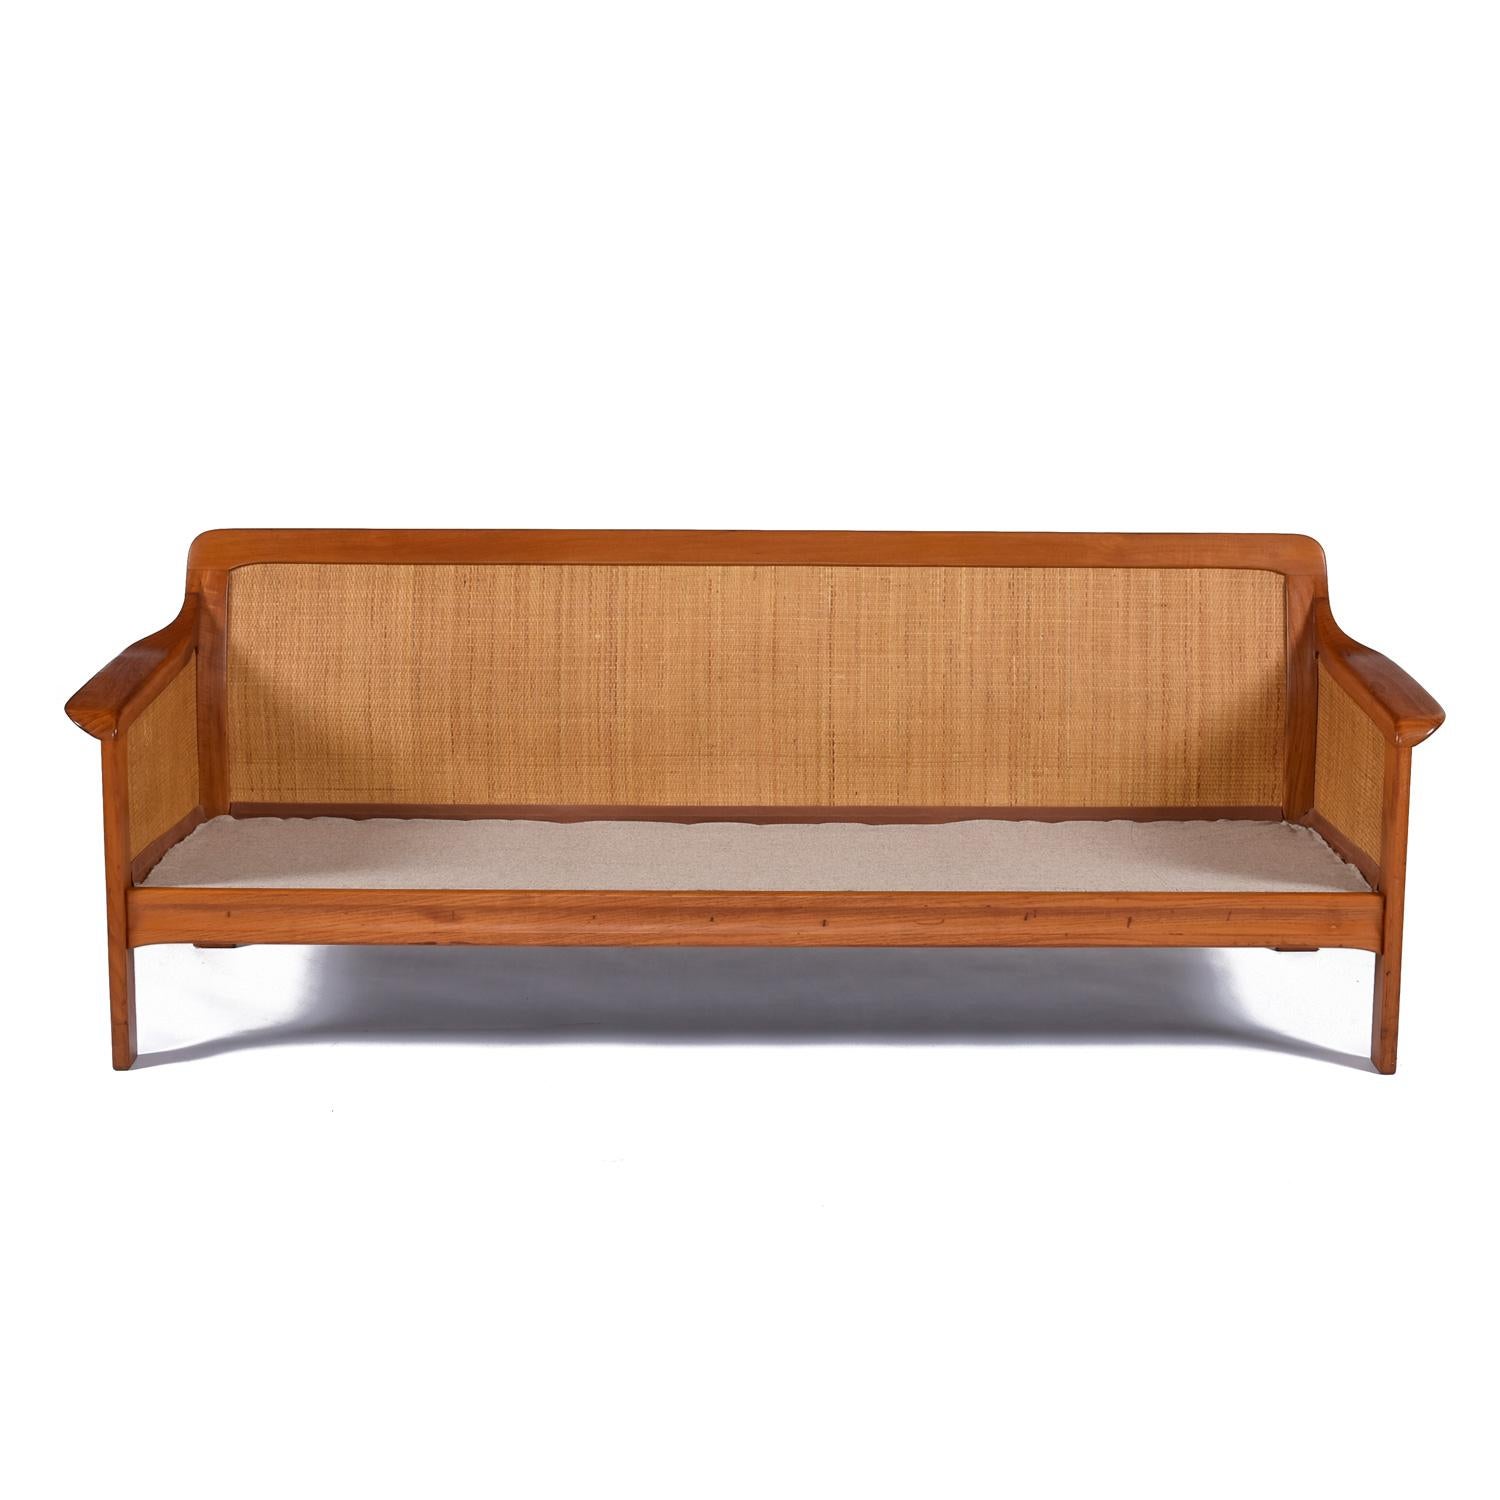 Late 20th Century Tufted Leather Balinese Style Danish Modern Solid Teak and Cane Sofa For Sale